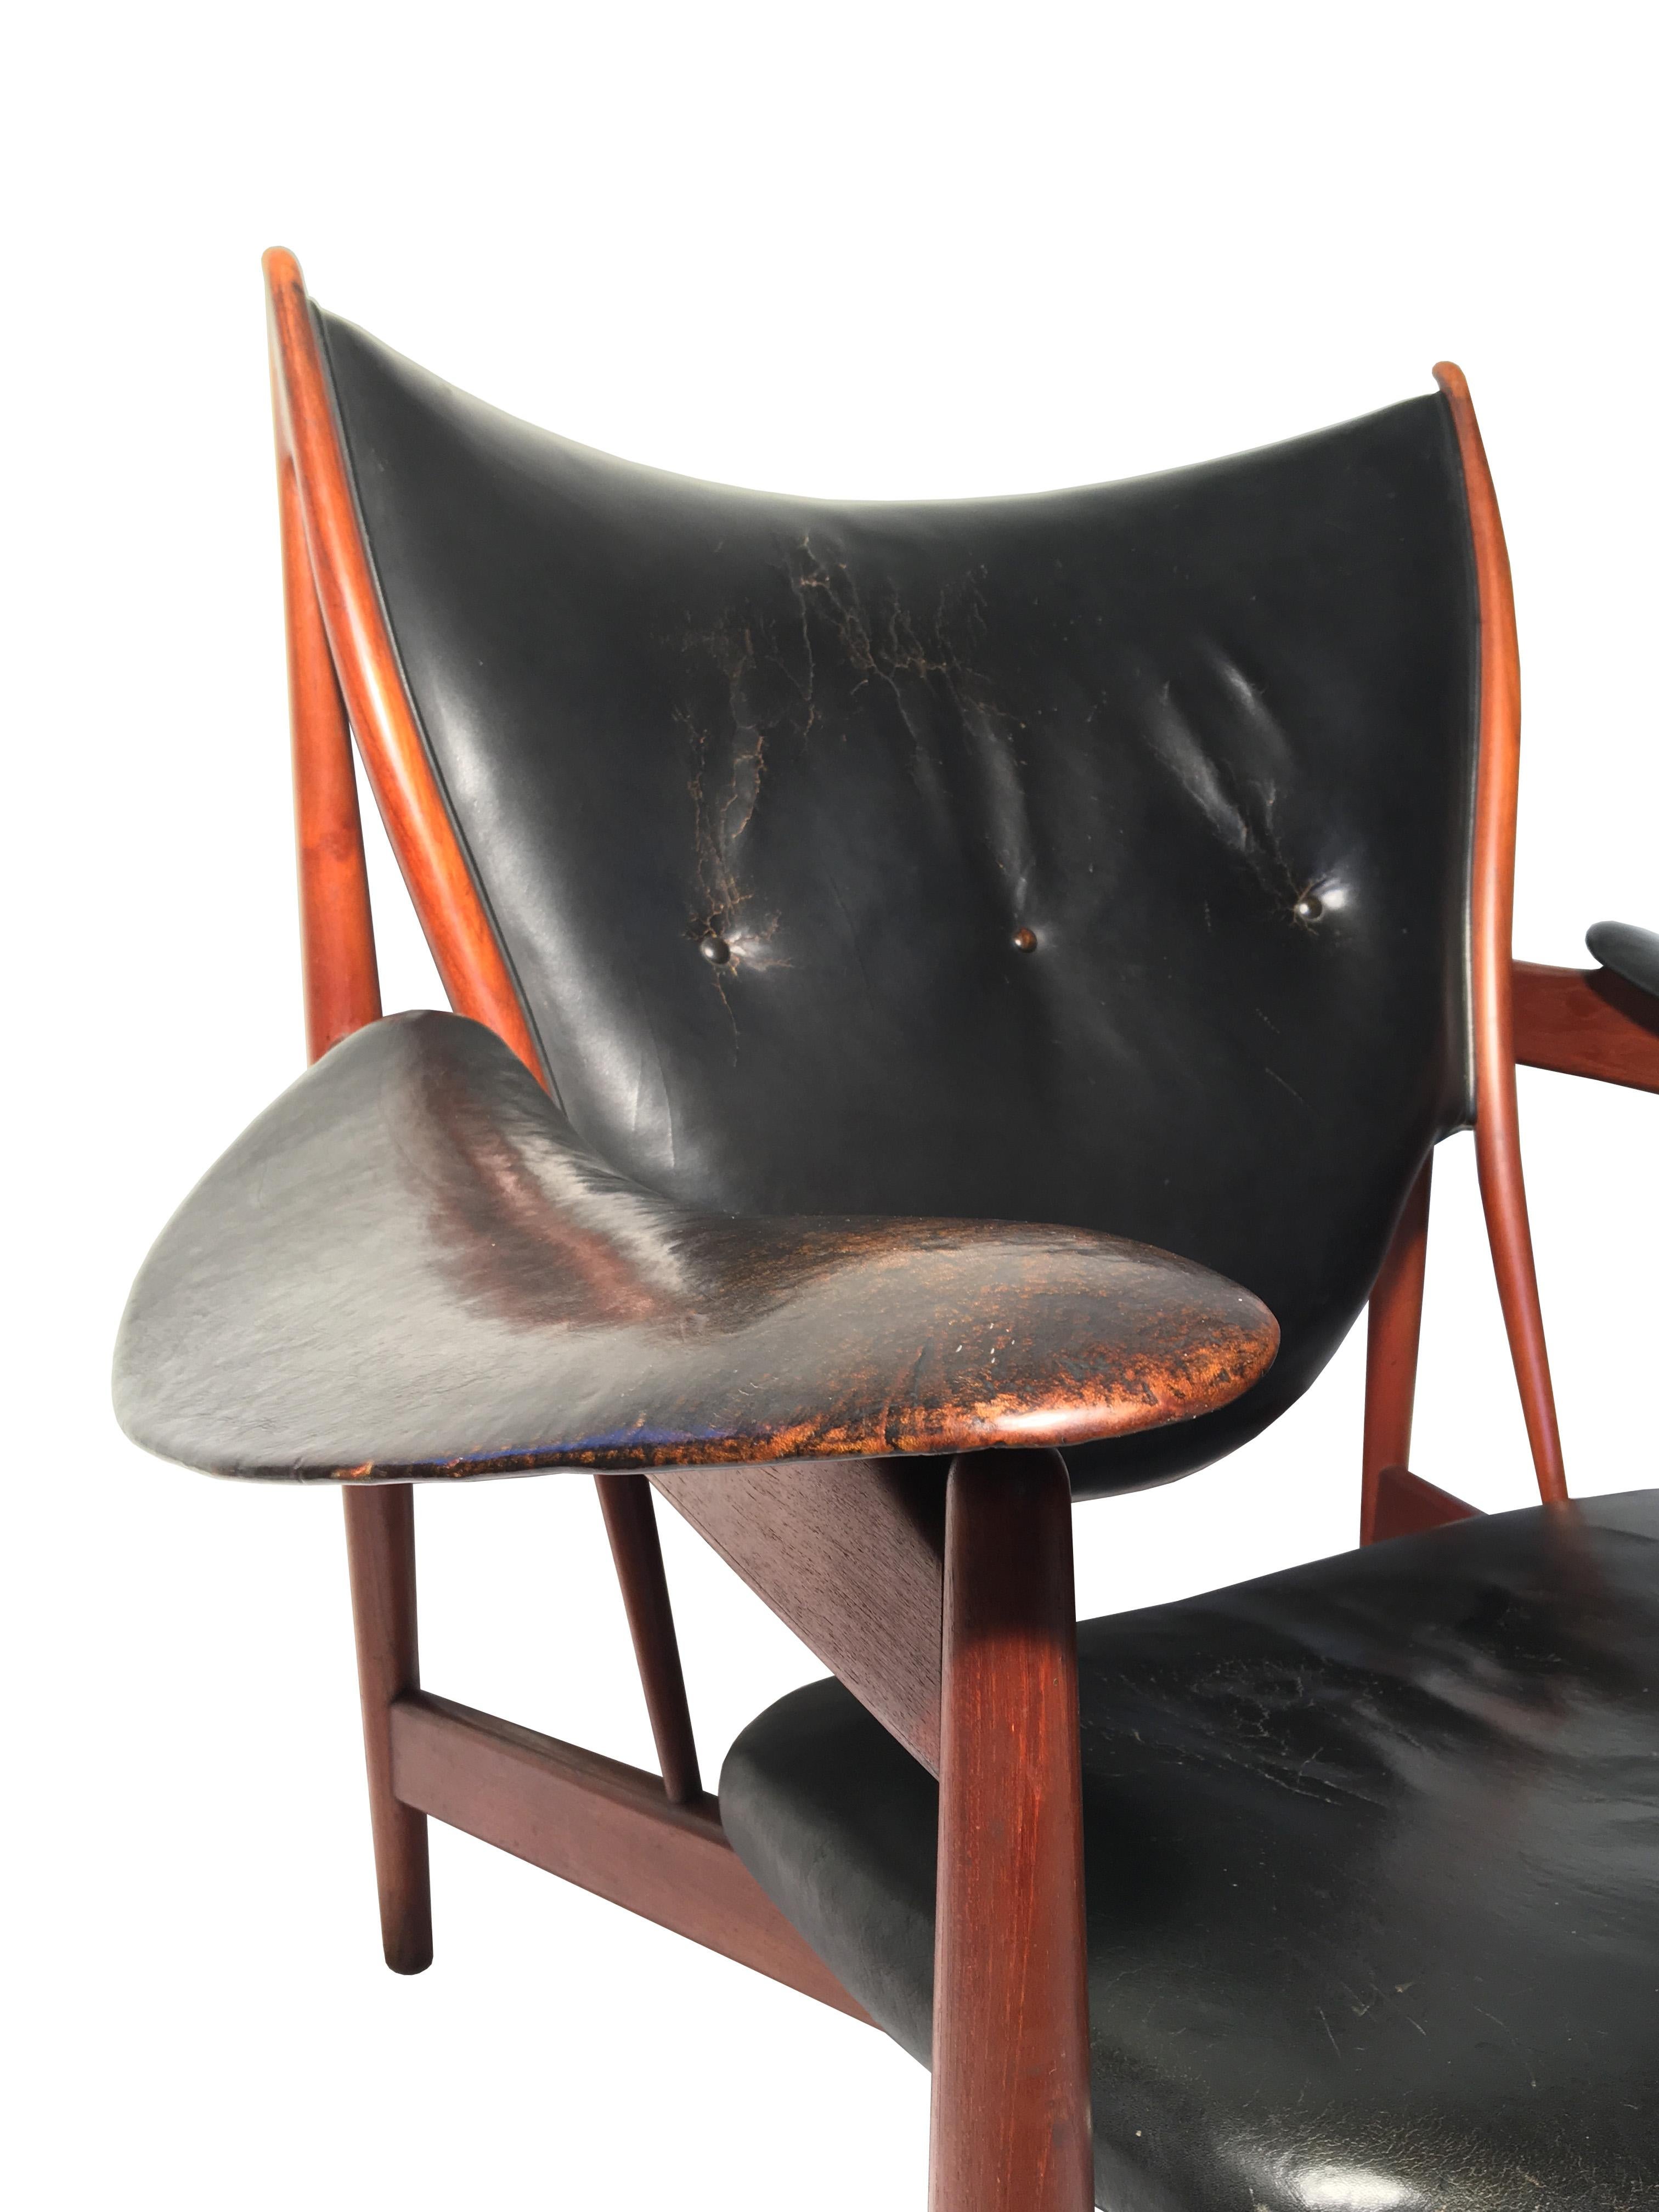 The iconic Chieftain Chair is Finn Juhl’s absolute masterpiece, representing the peak of his career as a furniture designer. The Chieftain Chair is as much a contemporary sculpture as it is a landmark design. Its dramatic, undulating, swooping